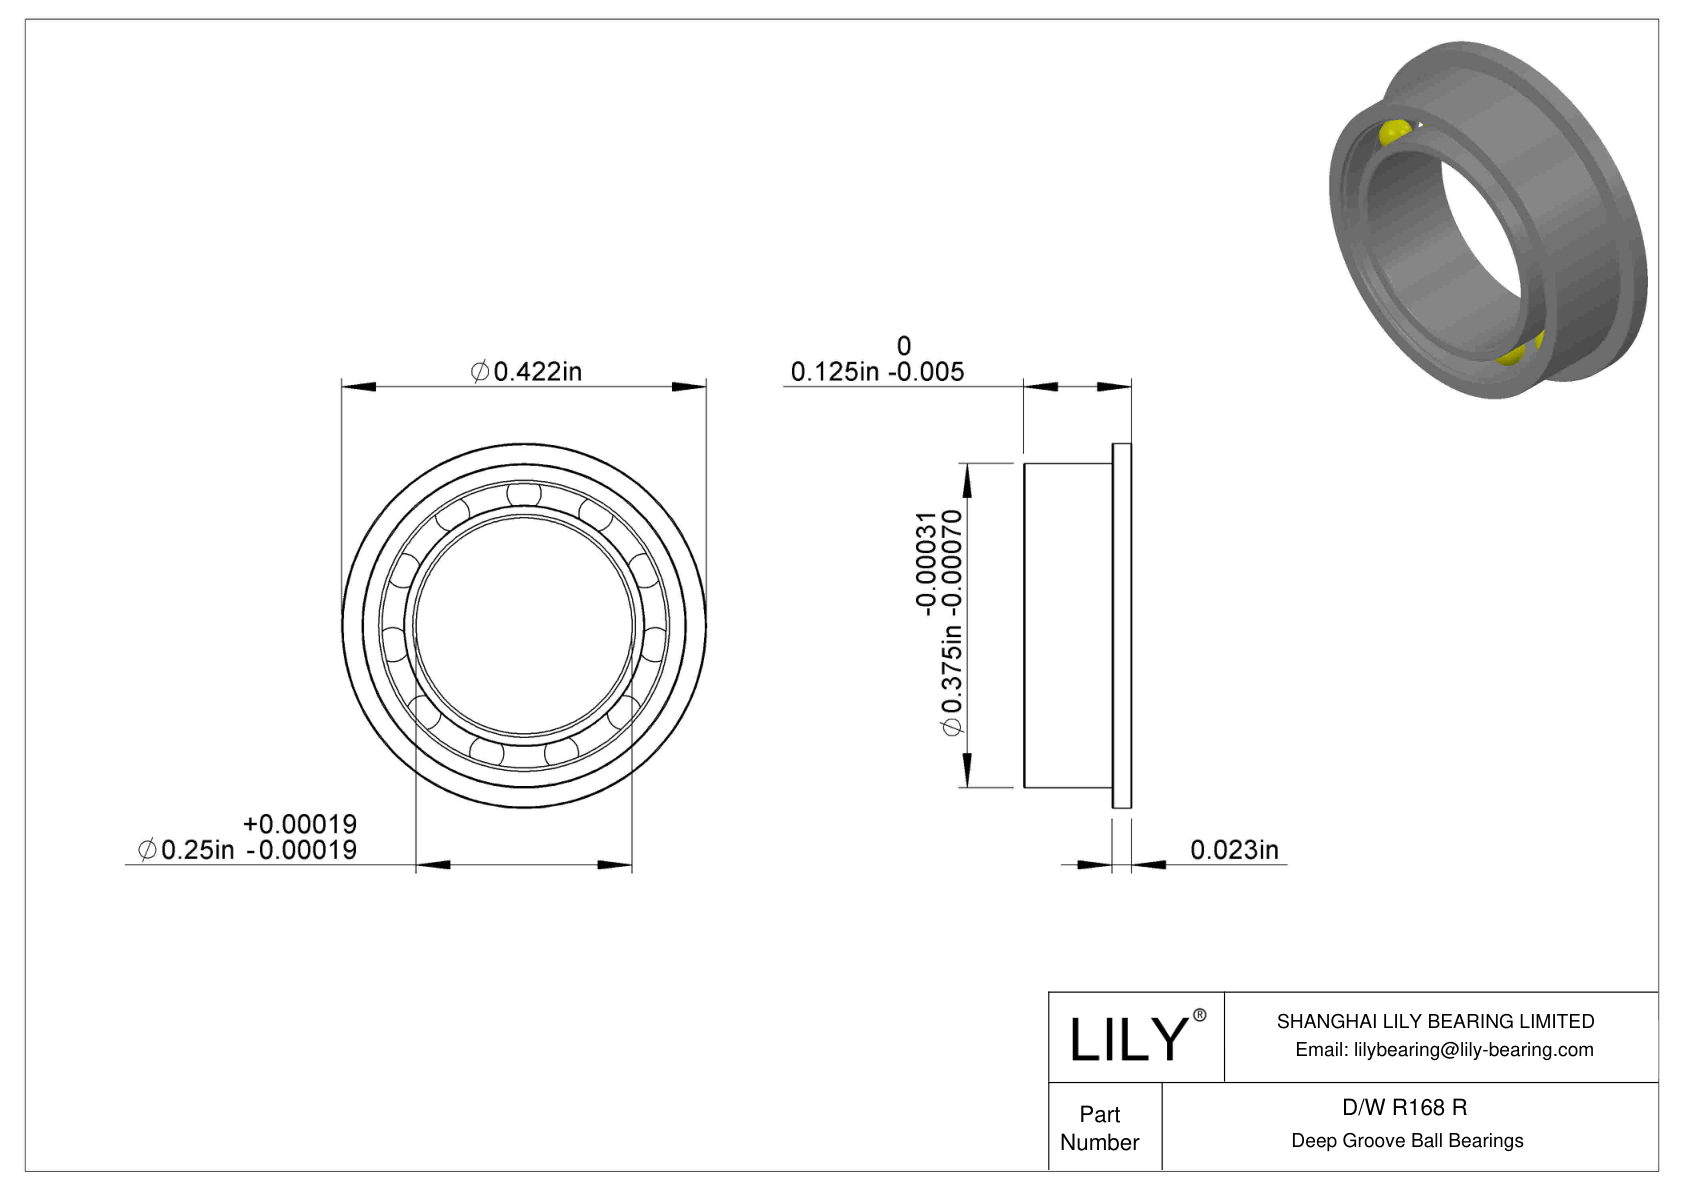 D/W R168 R Flanged Ball Bearings cad drawing